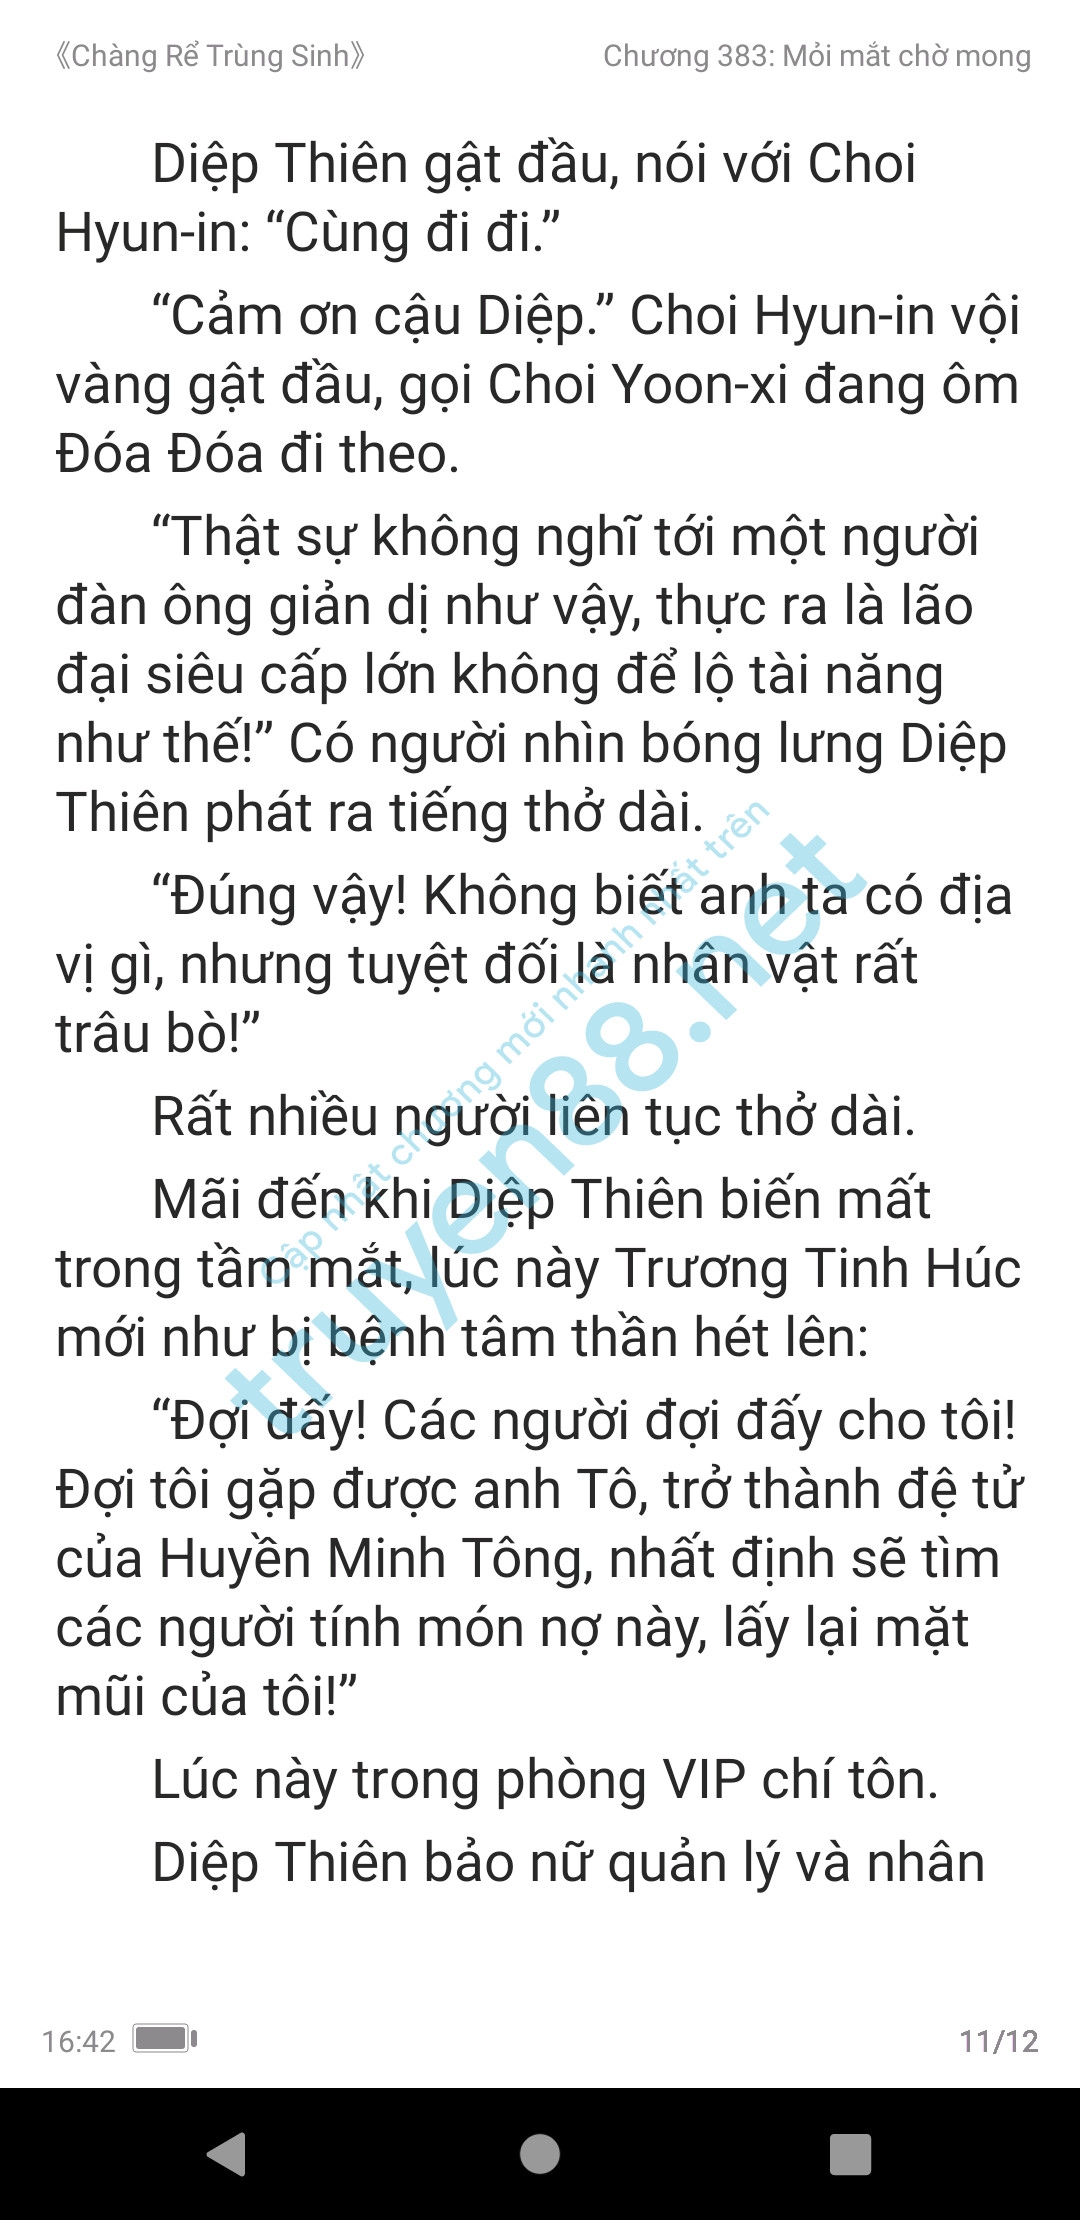 chang-re-trung-sinh-383-0